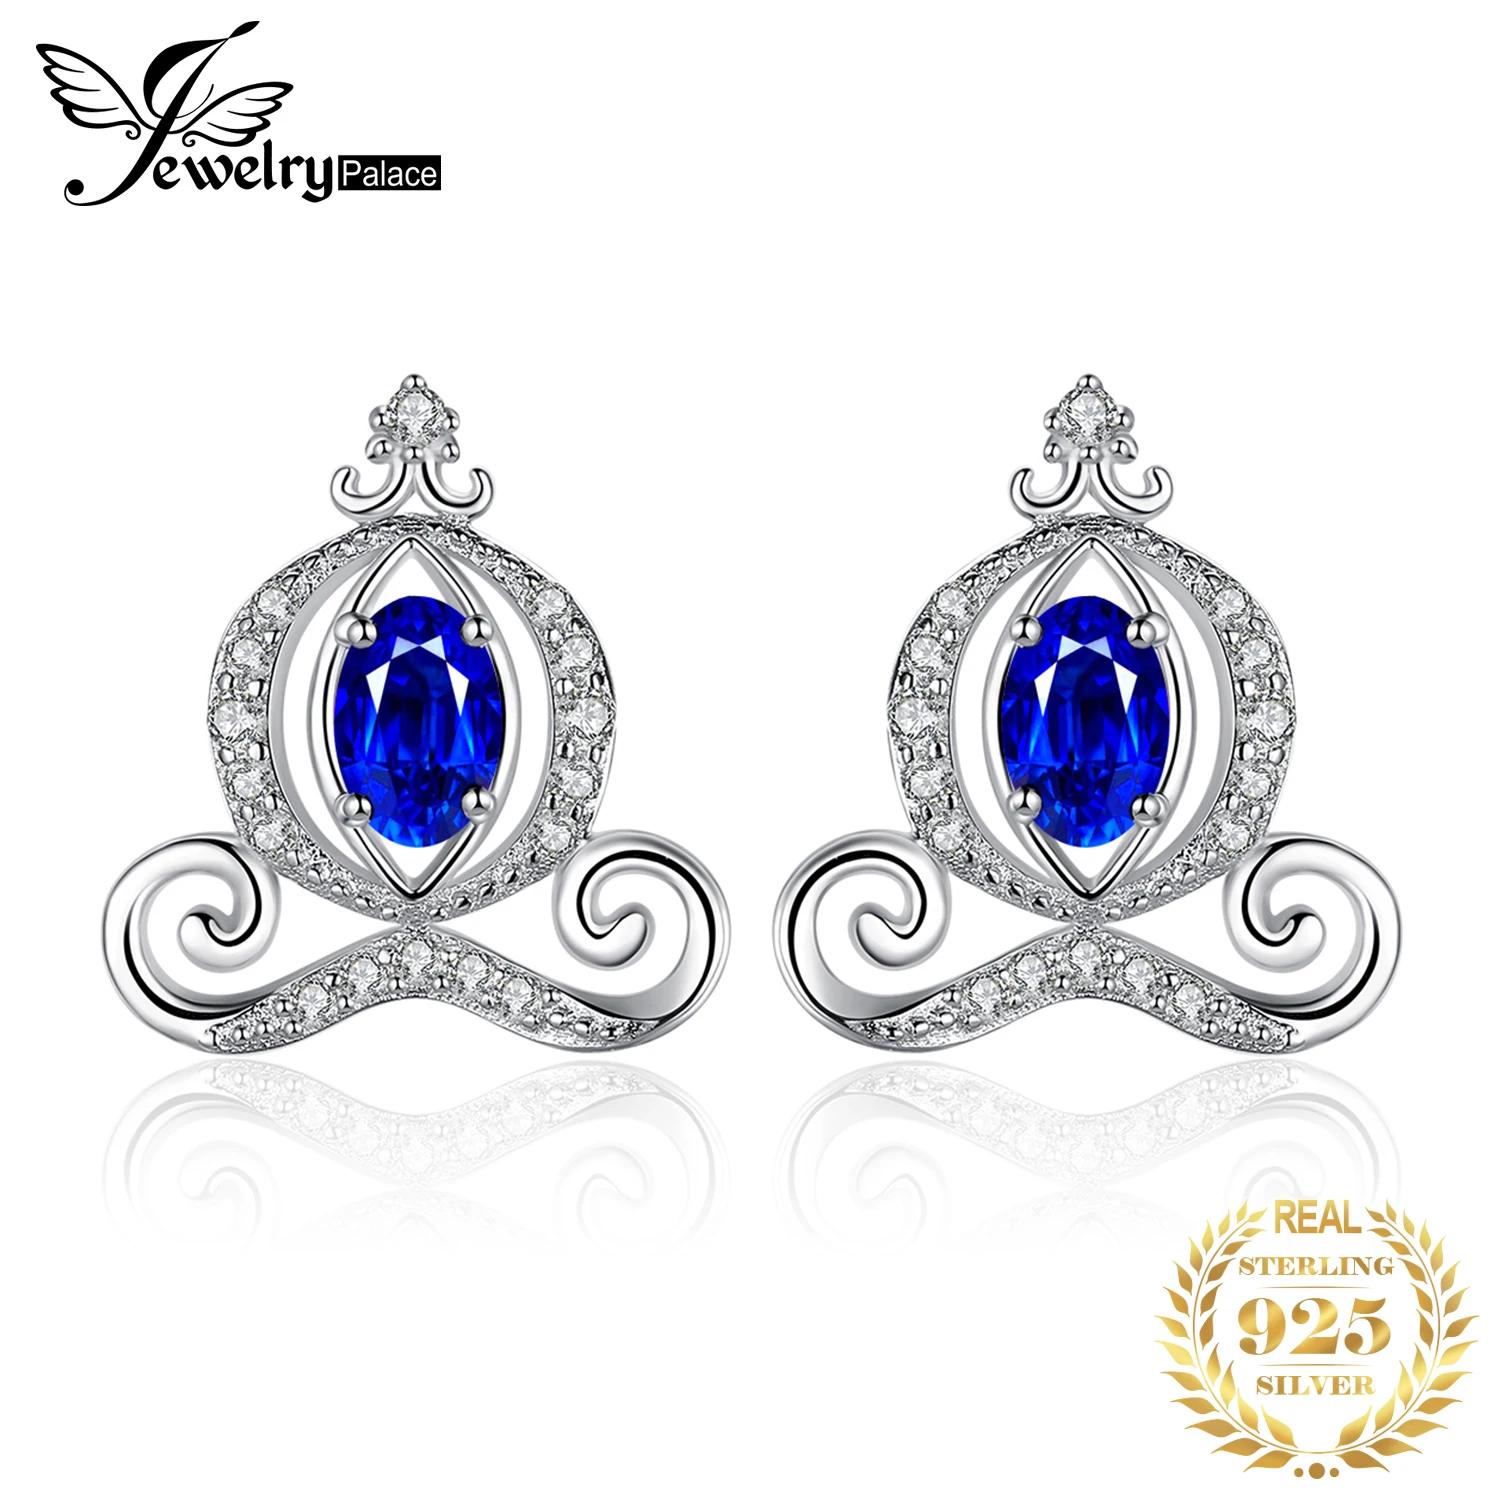 

Jewelrypalace Pumpkin Carriage Created Sapphire 925 Sterling Silver Stud Earrings for Women Gemstone Fine Jewelry Birthday Gift